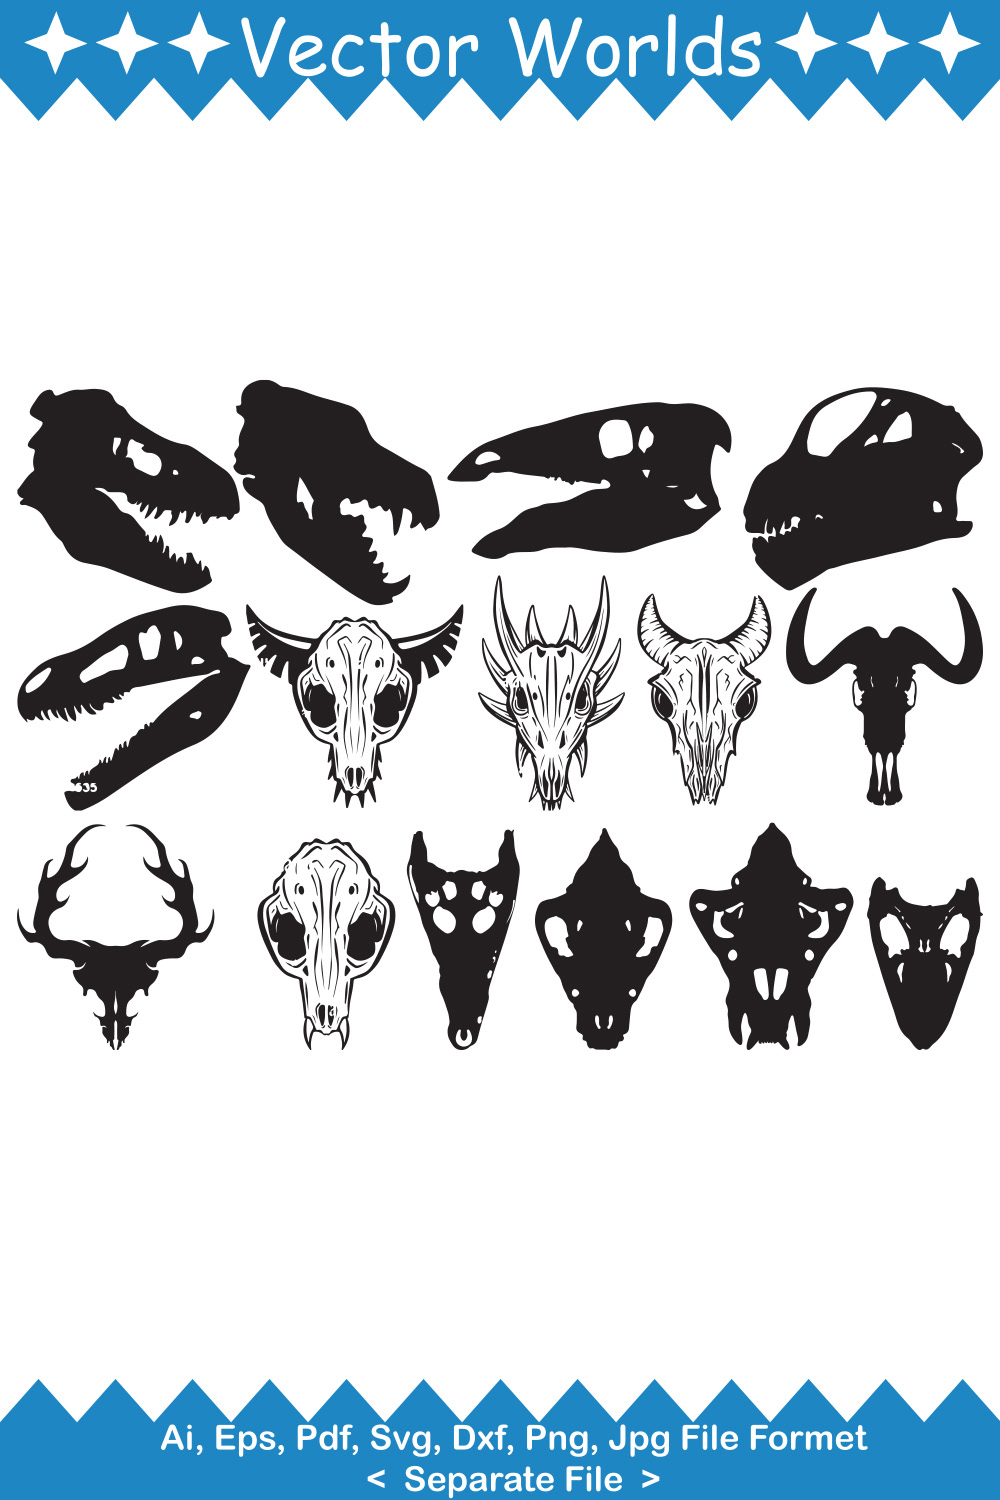 Set of silhouettes of different animal heads.